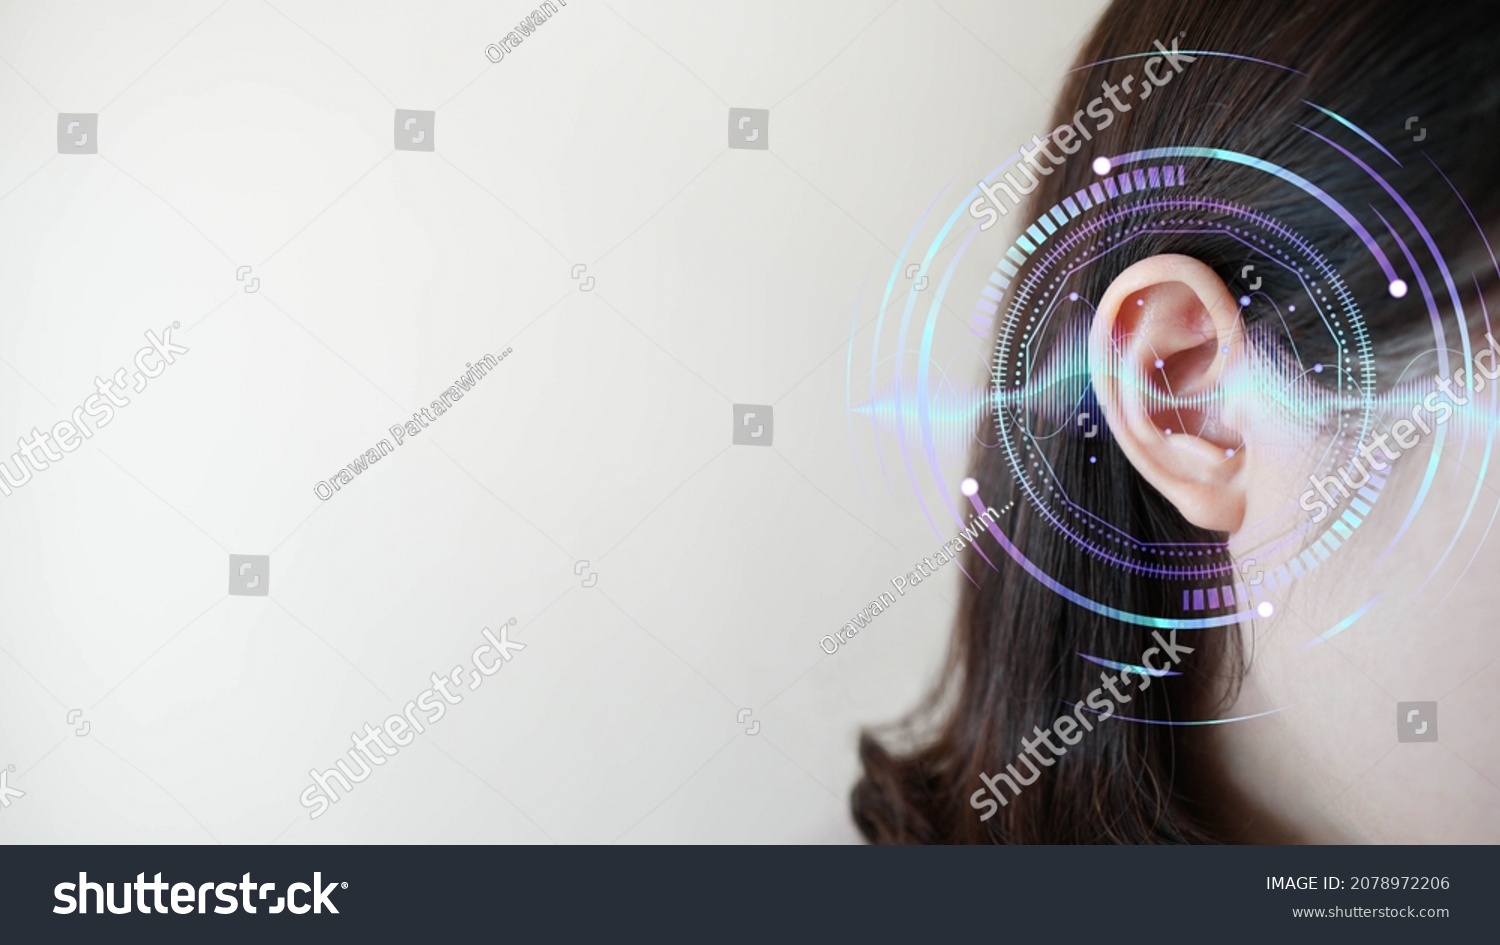 Ear of young woman with sound waves simulation technology. Concept of hearing test, hearing aids, ear disorders and health care. #2078972206